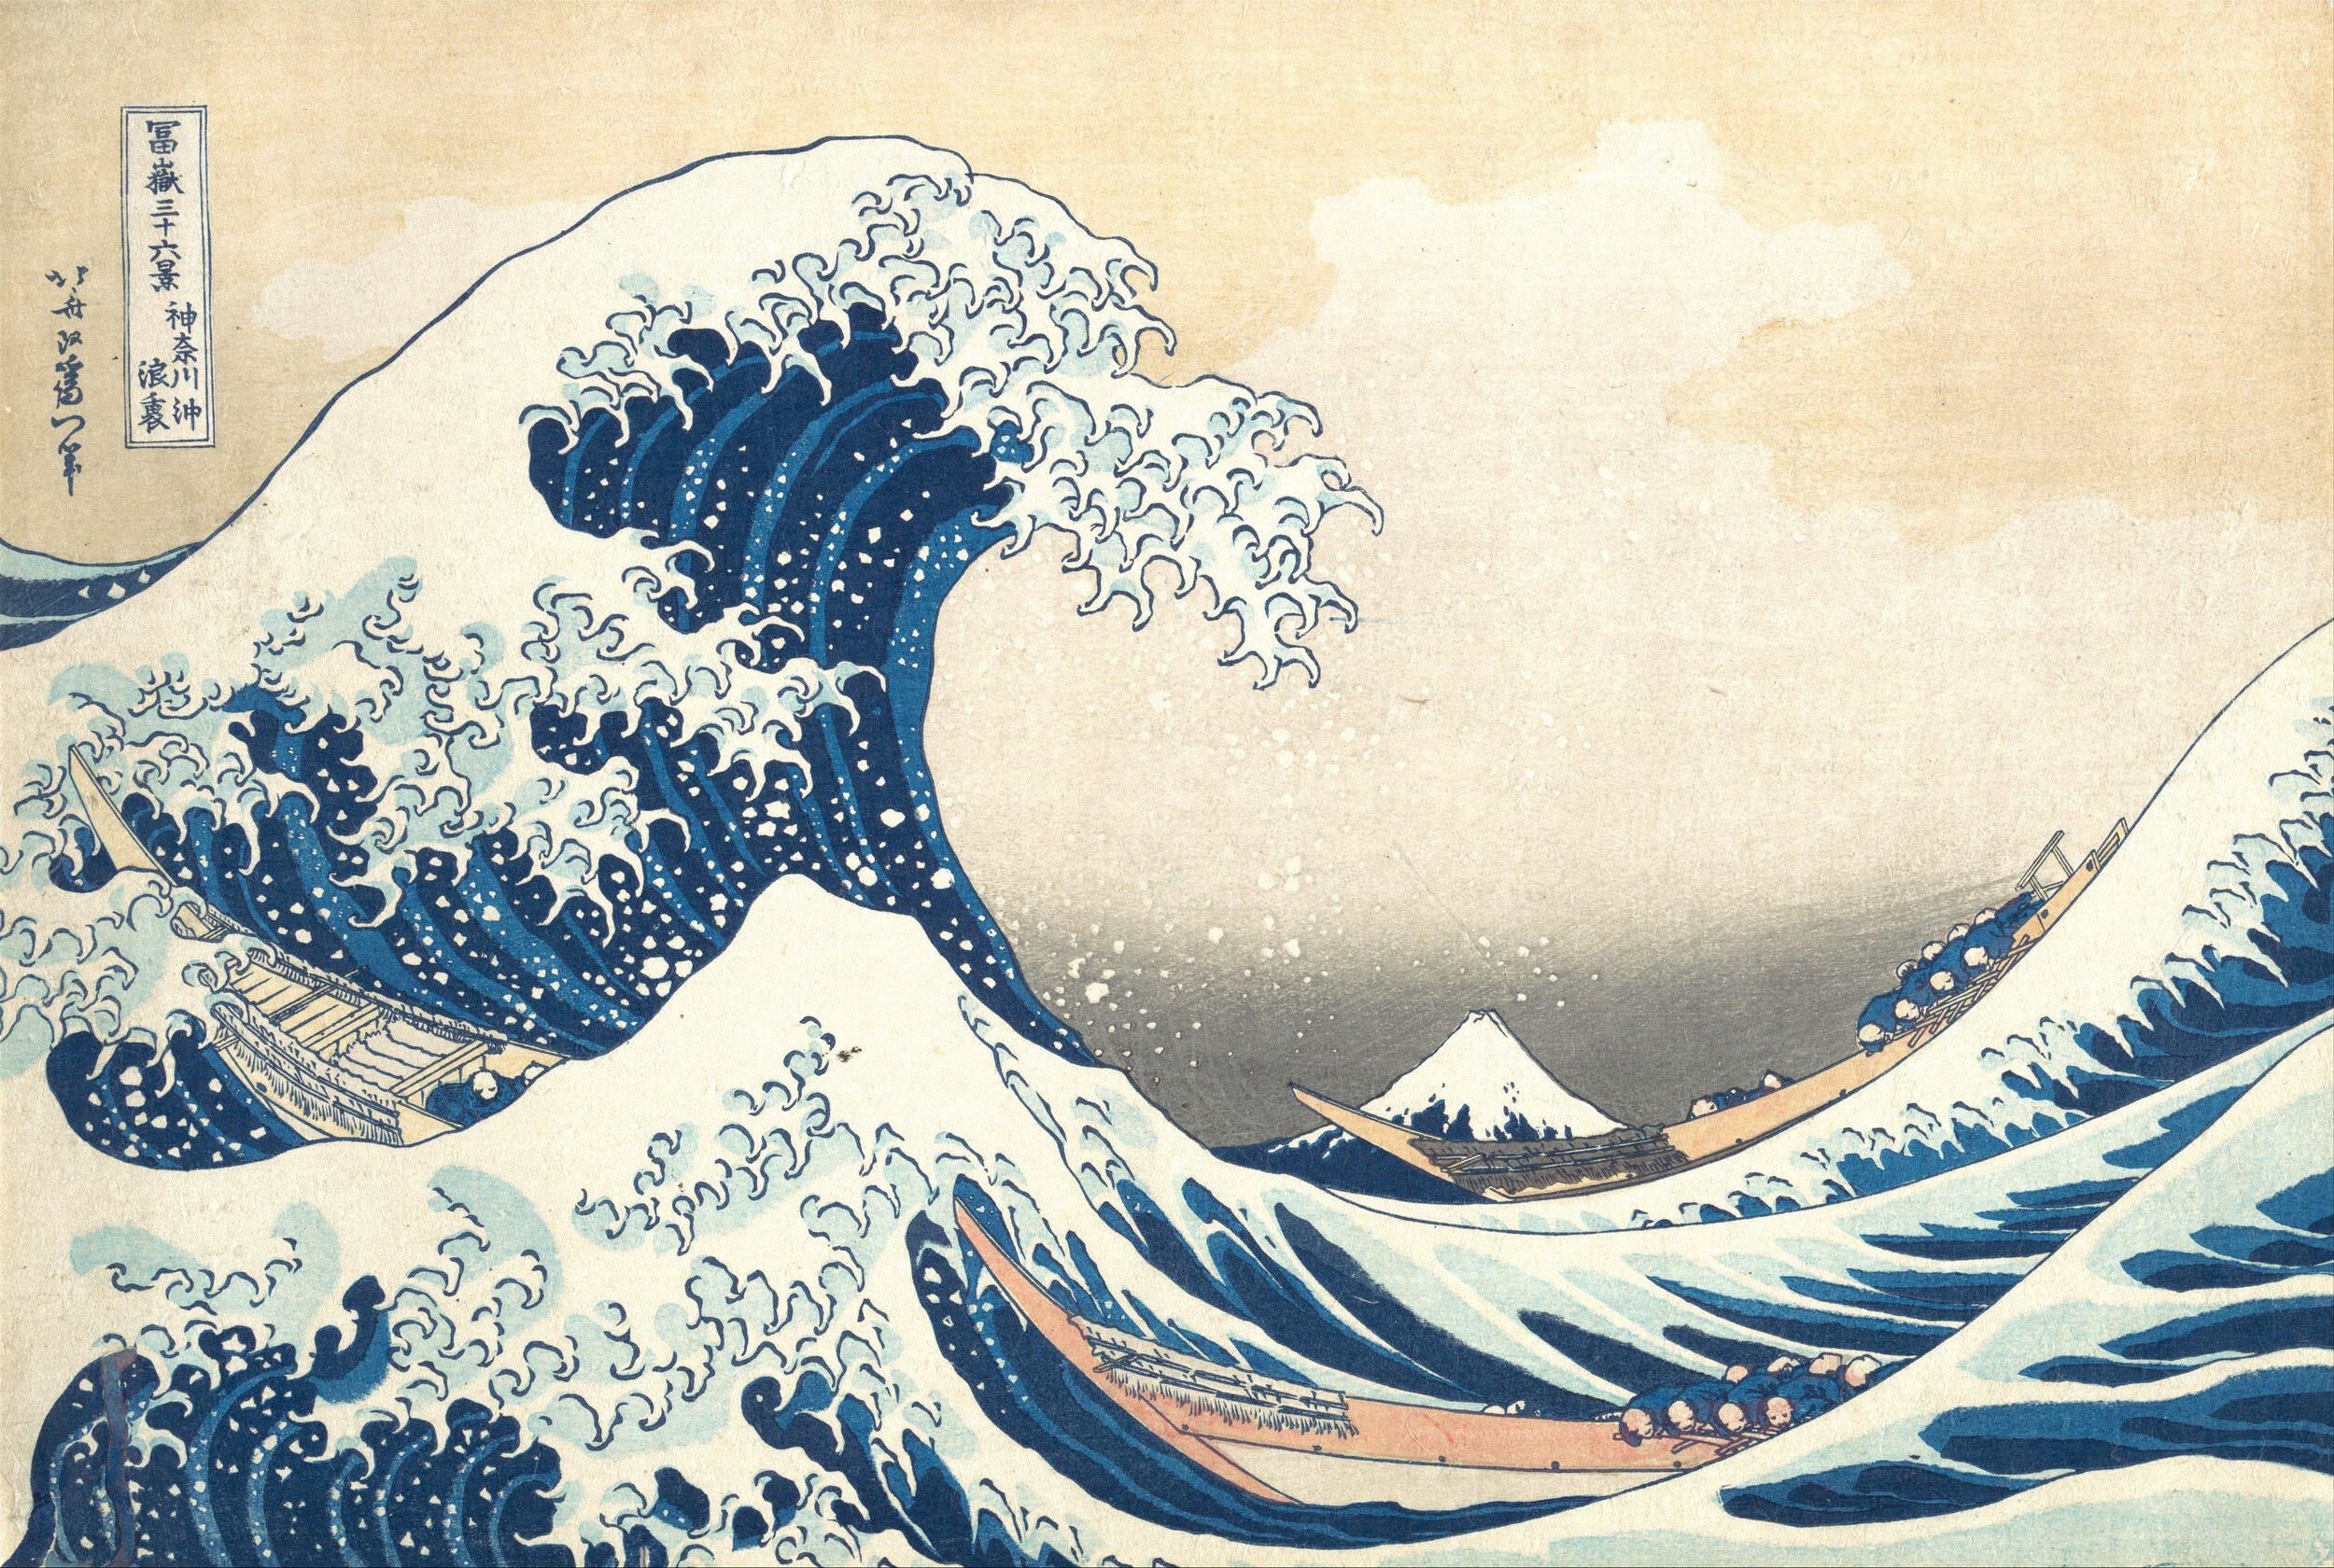 Hokusai, The Great Wave off Kanagawa (or The Great Wave), completed between 1829 and 1833